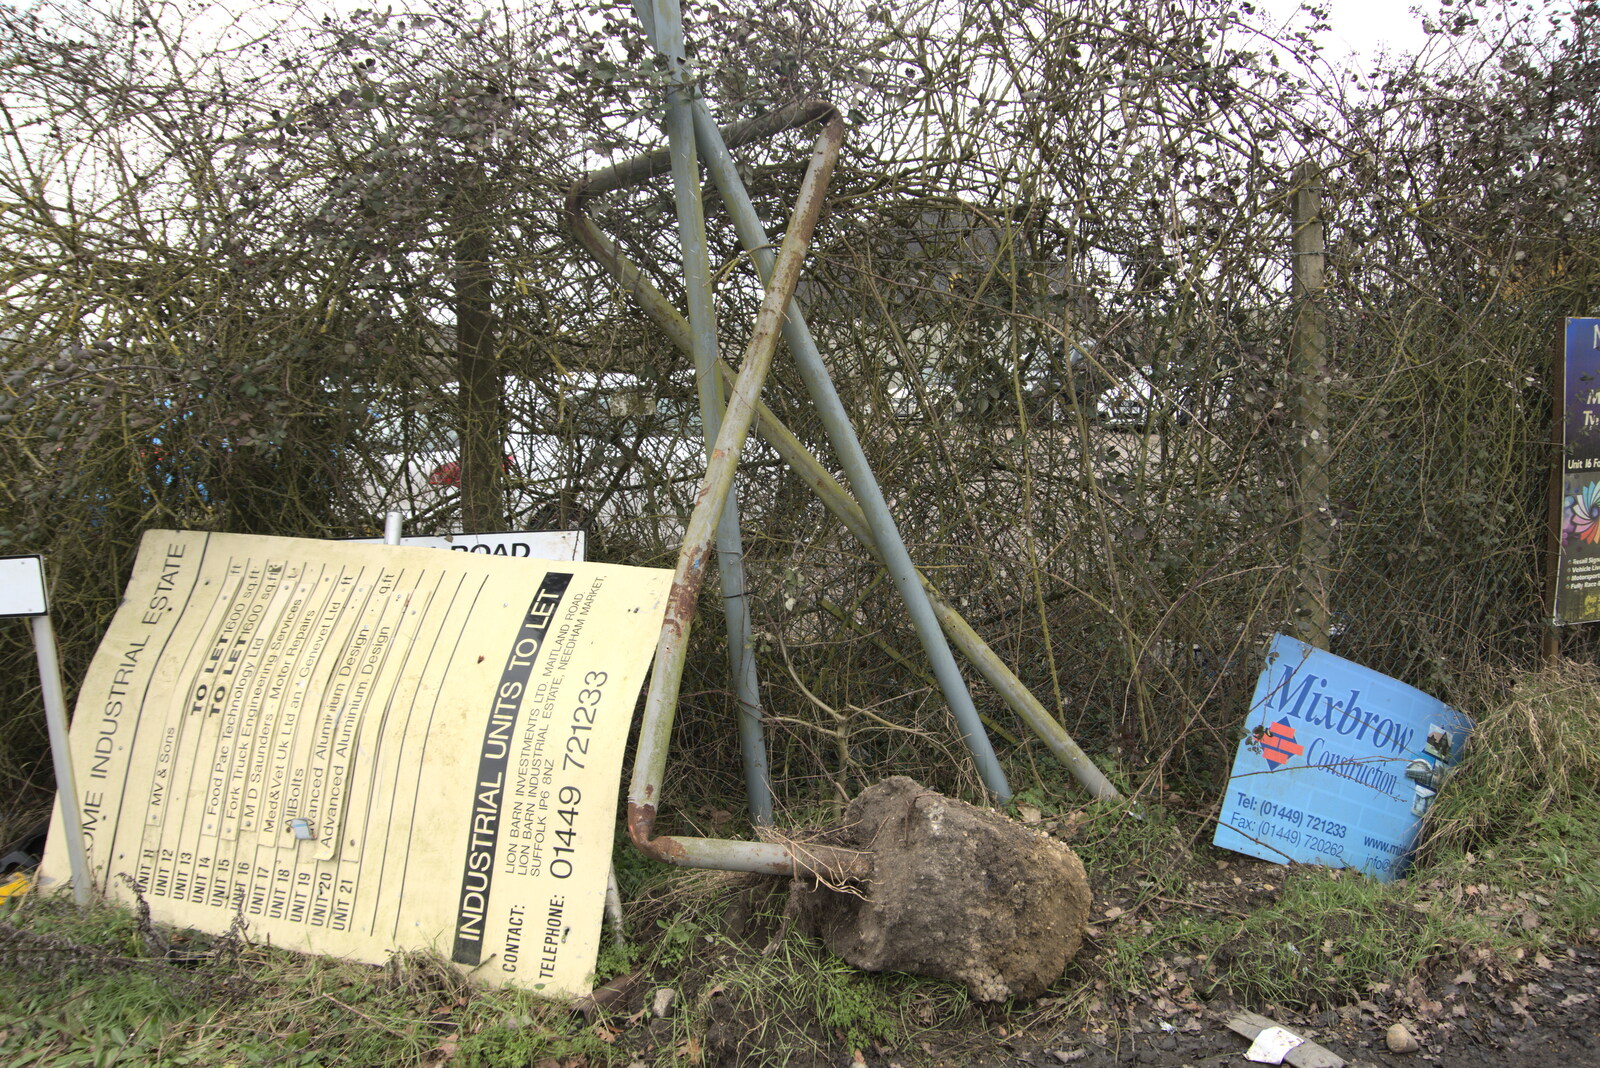 A discarded road sign has been curiously mangled from The Old Sewage Works, The Avenue, Brome, Suffolk - 20th February 2021